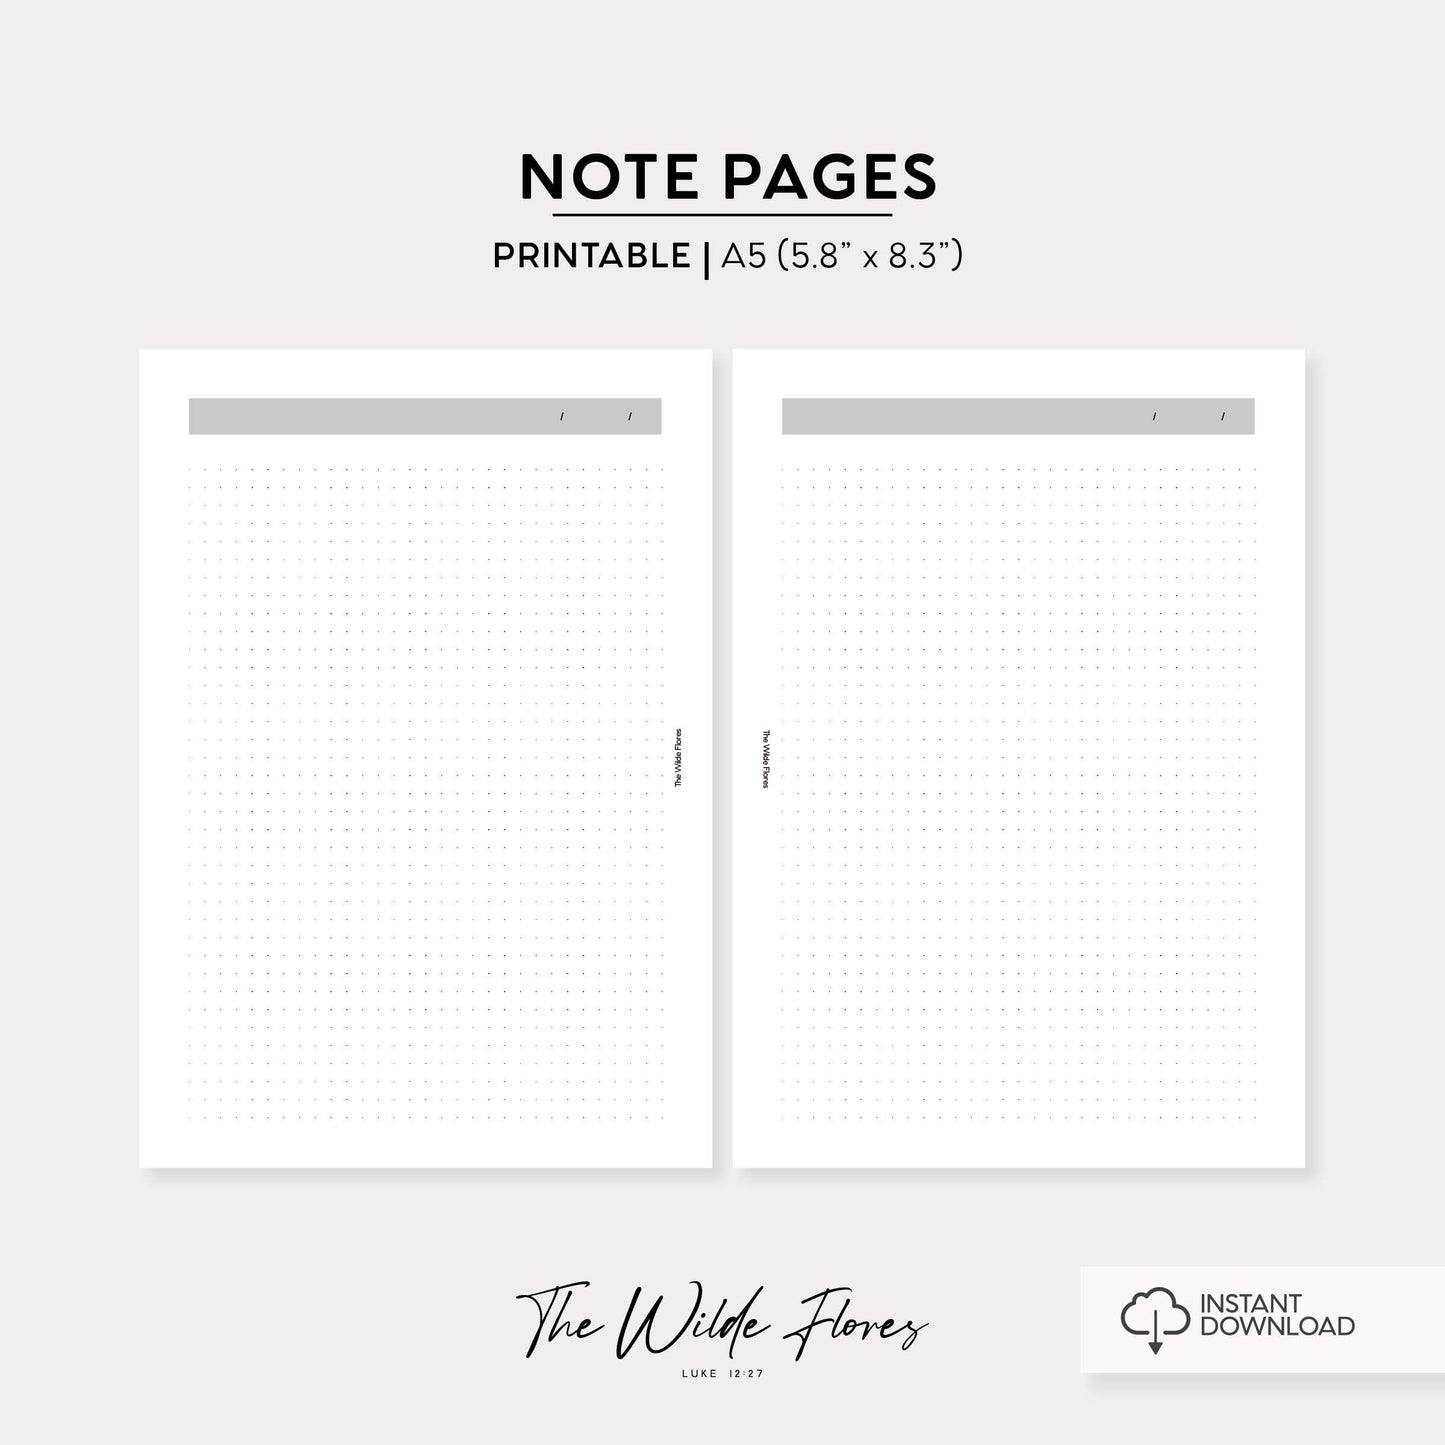 Dot Grid Note Pages: A5 Size Printable